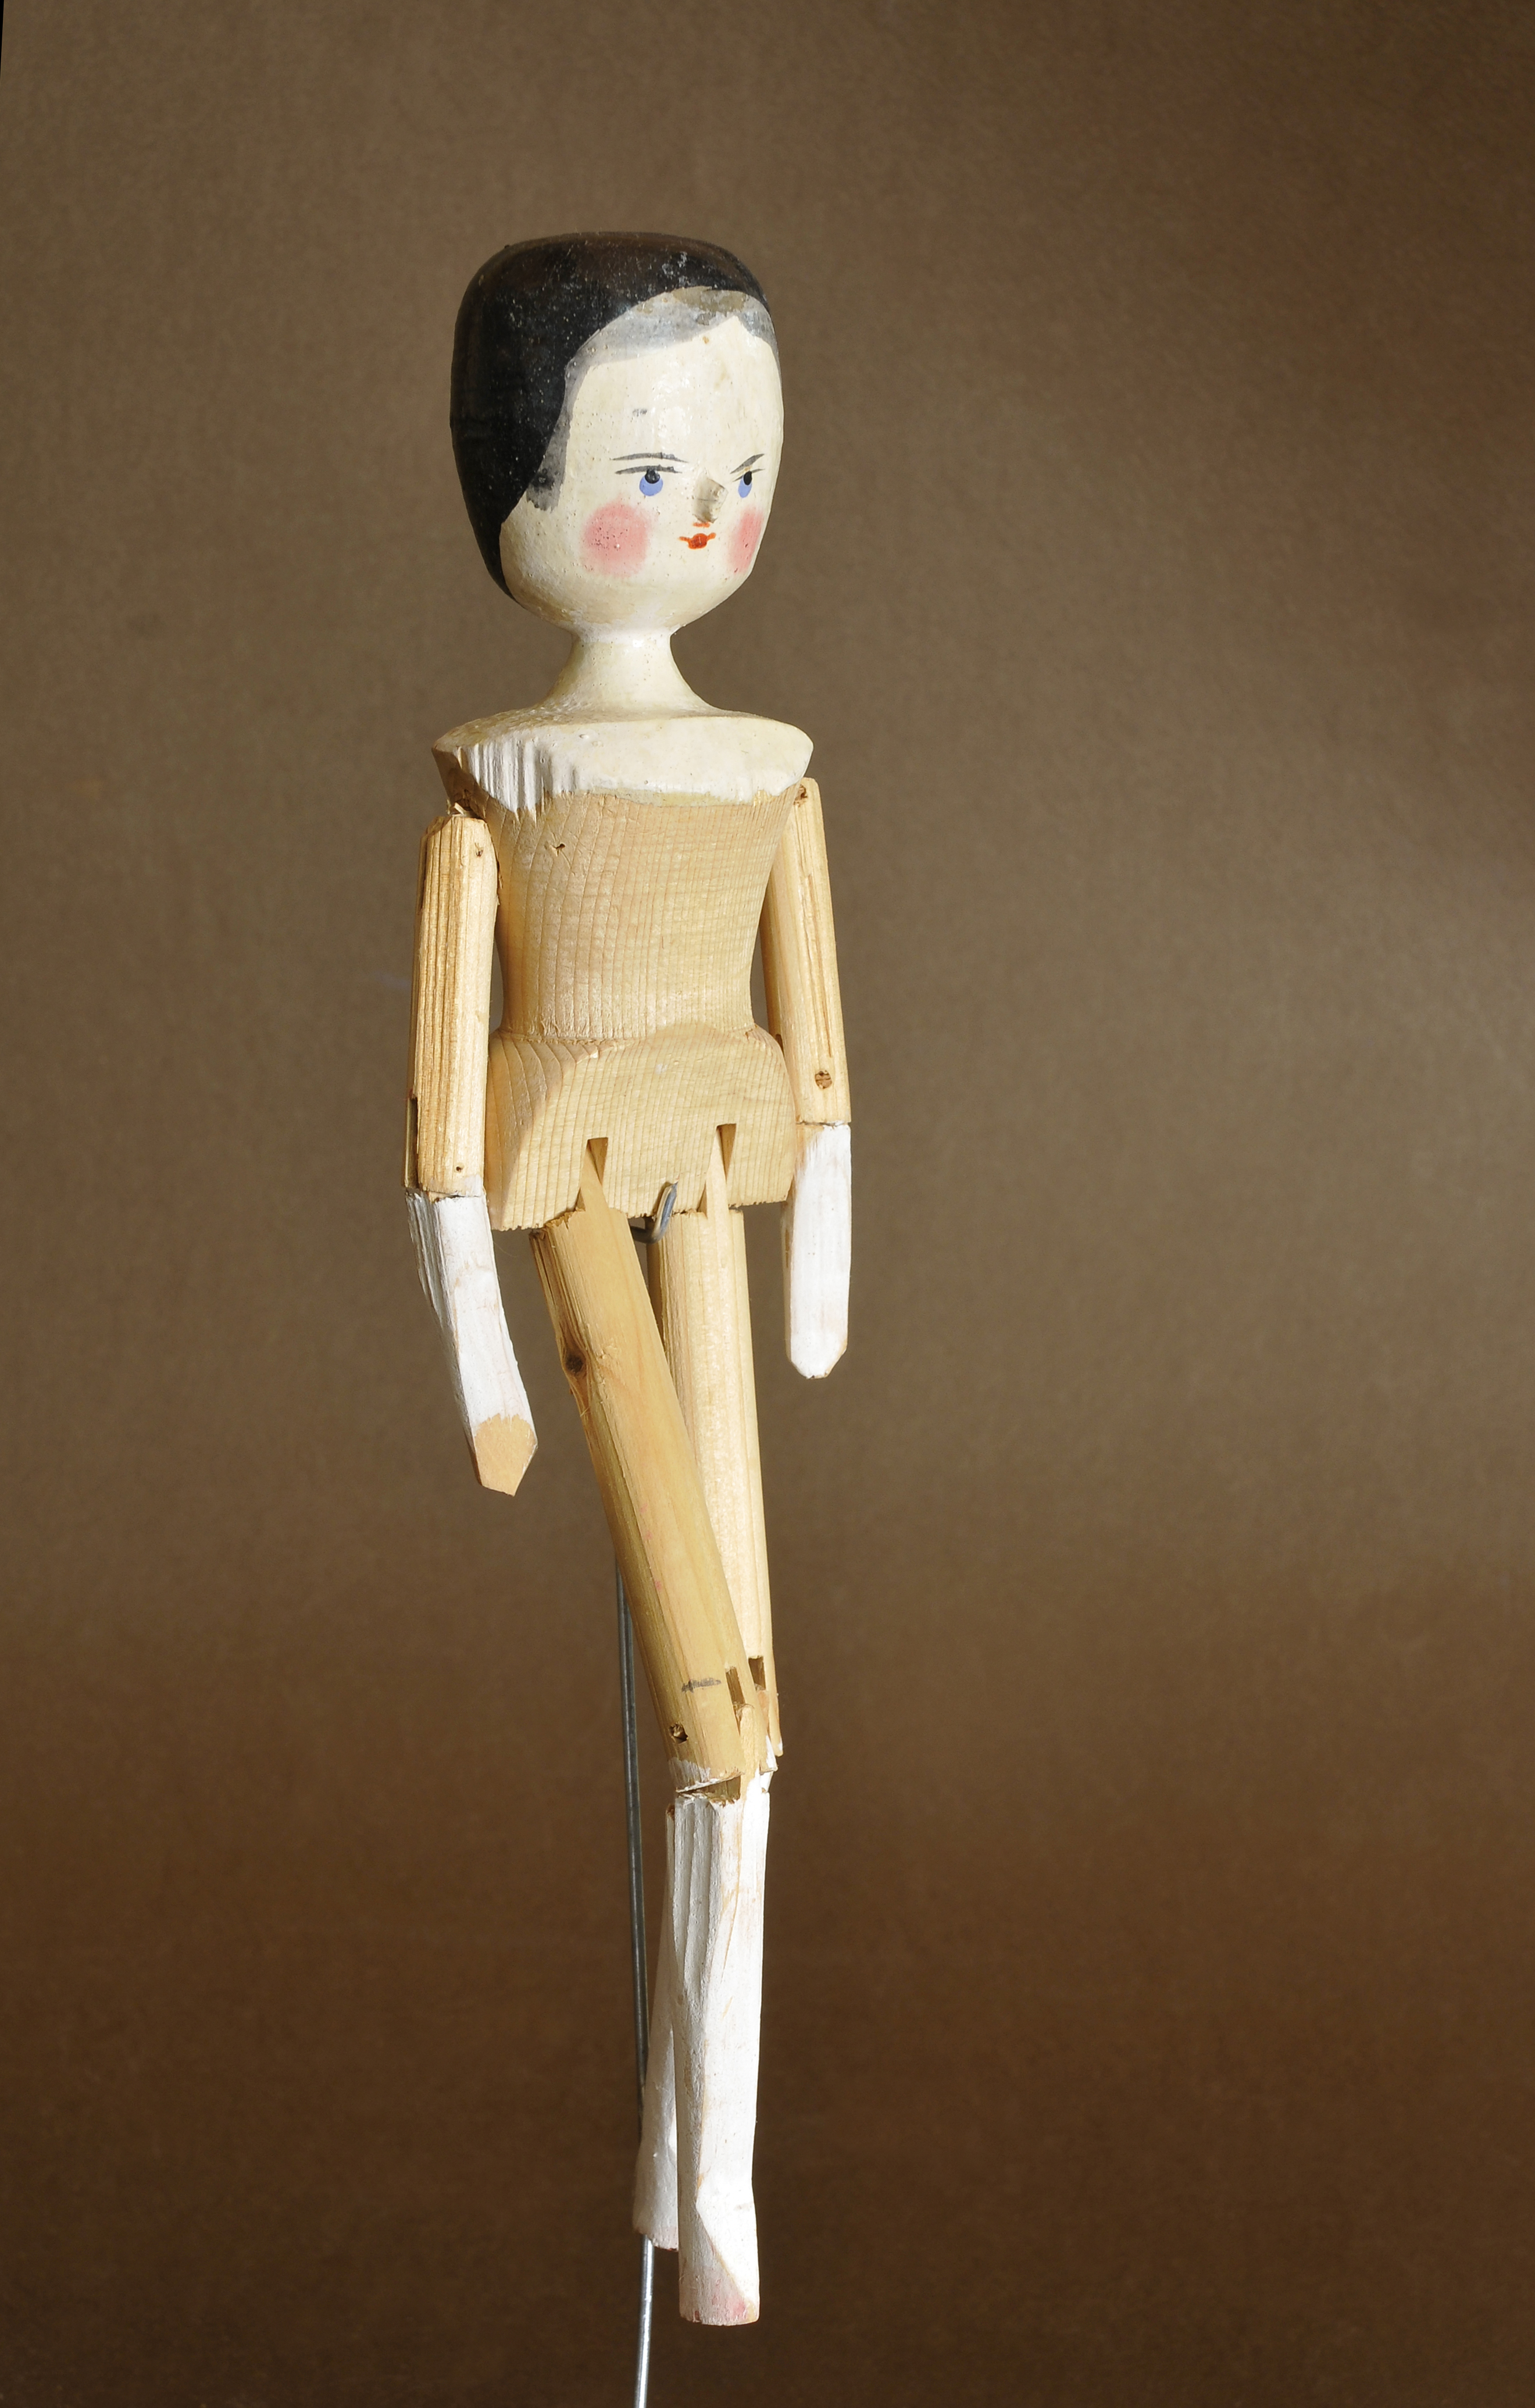 The Wooden Doll